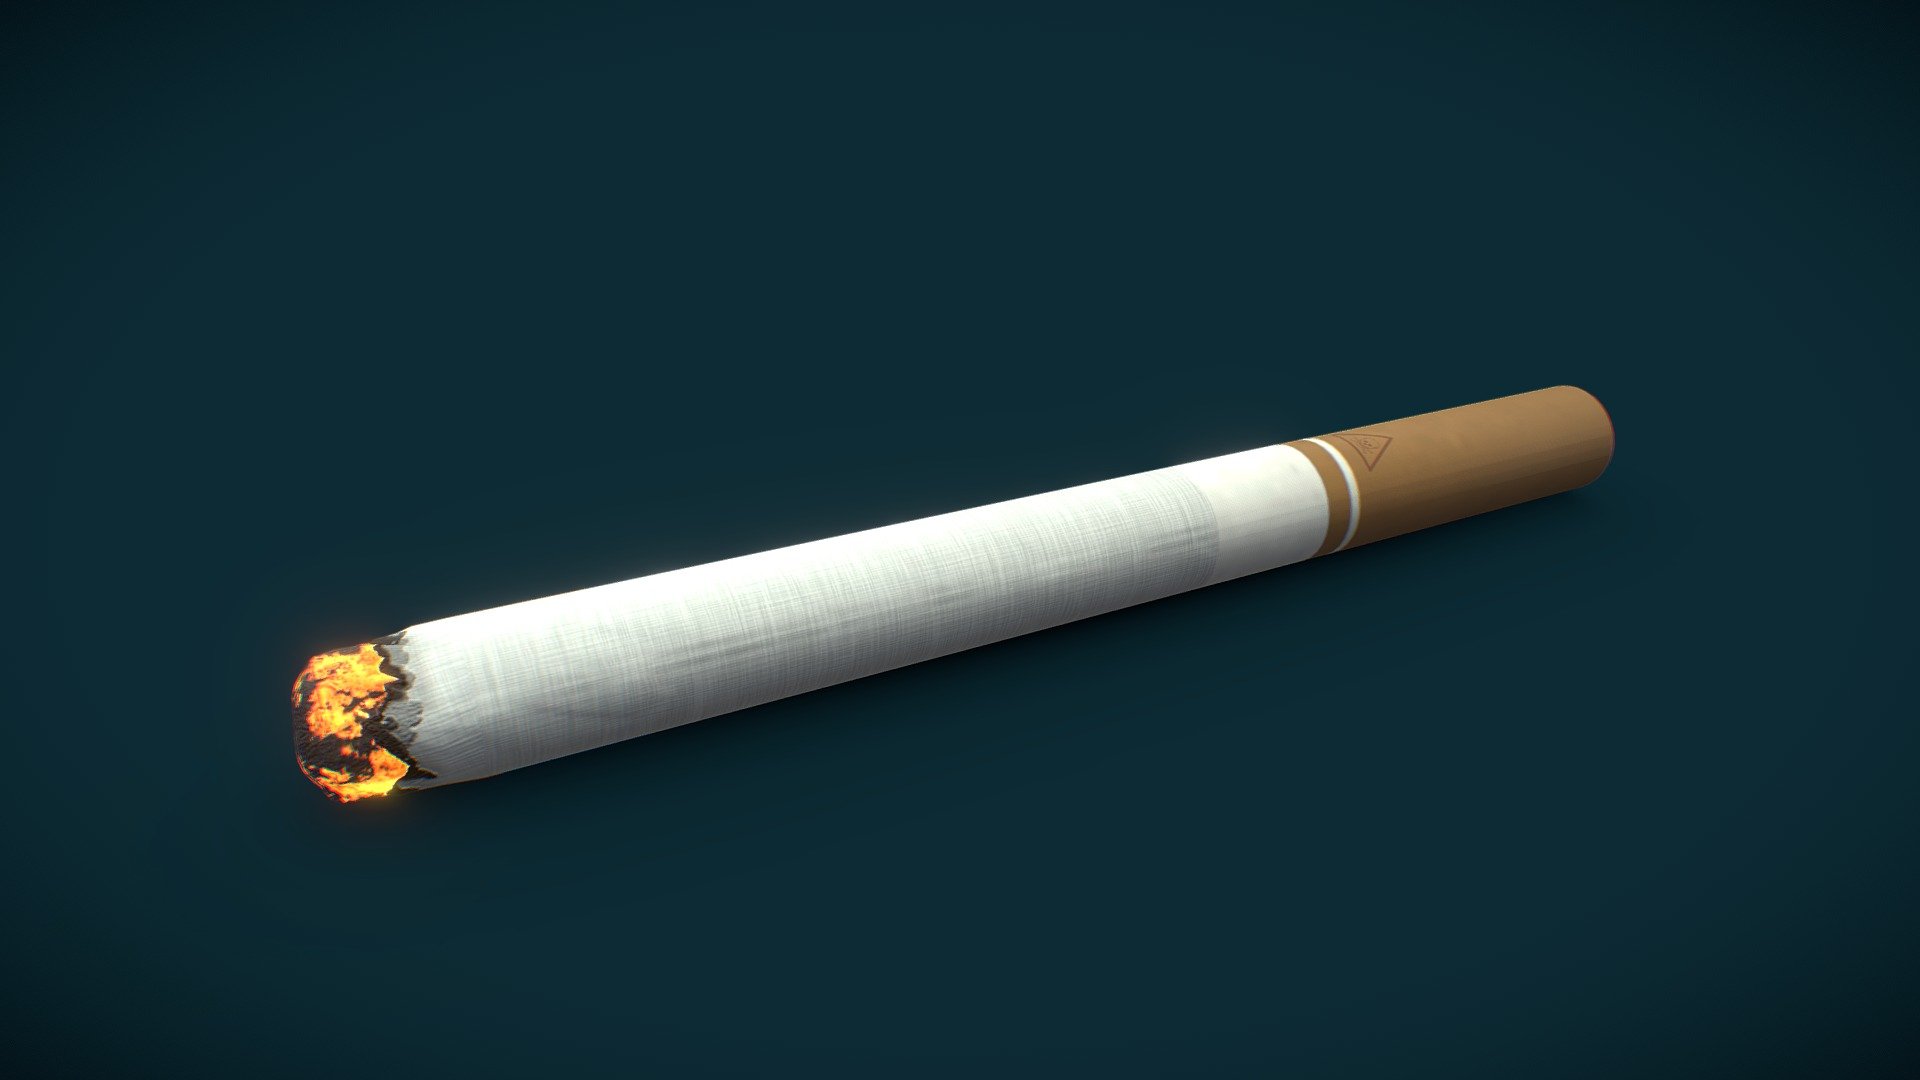 Cigarette for the reddit daily3D challenge #327. Modelled in blender and textured in substance painter :) - Cigarette - daily3D - Download Free 3D model by RomanMaksy 3d model